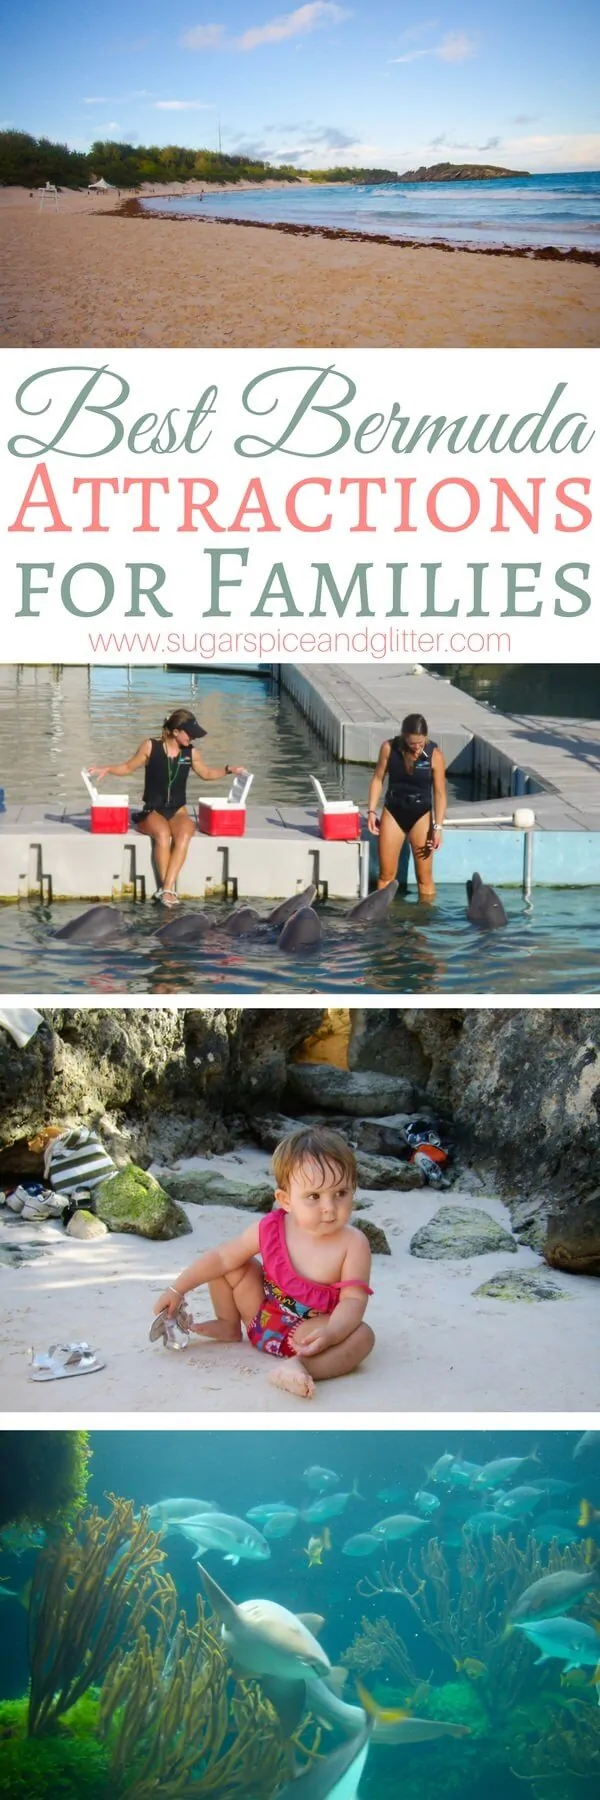 If Bermuda is on your family's bucket list, you need to check out this list of the Best Bermuda Attractions for families - some of them are free and some are one-of-a-kind experiences you will only find in Bermuda